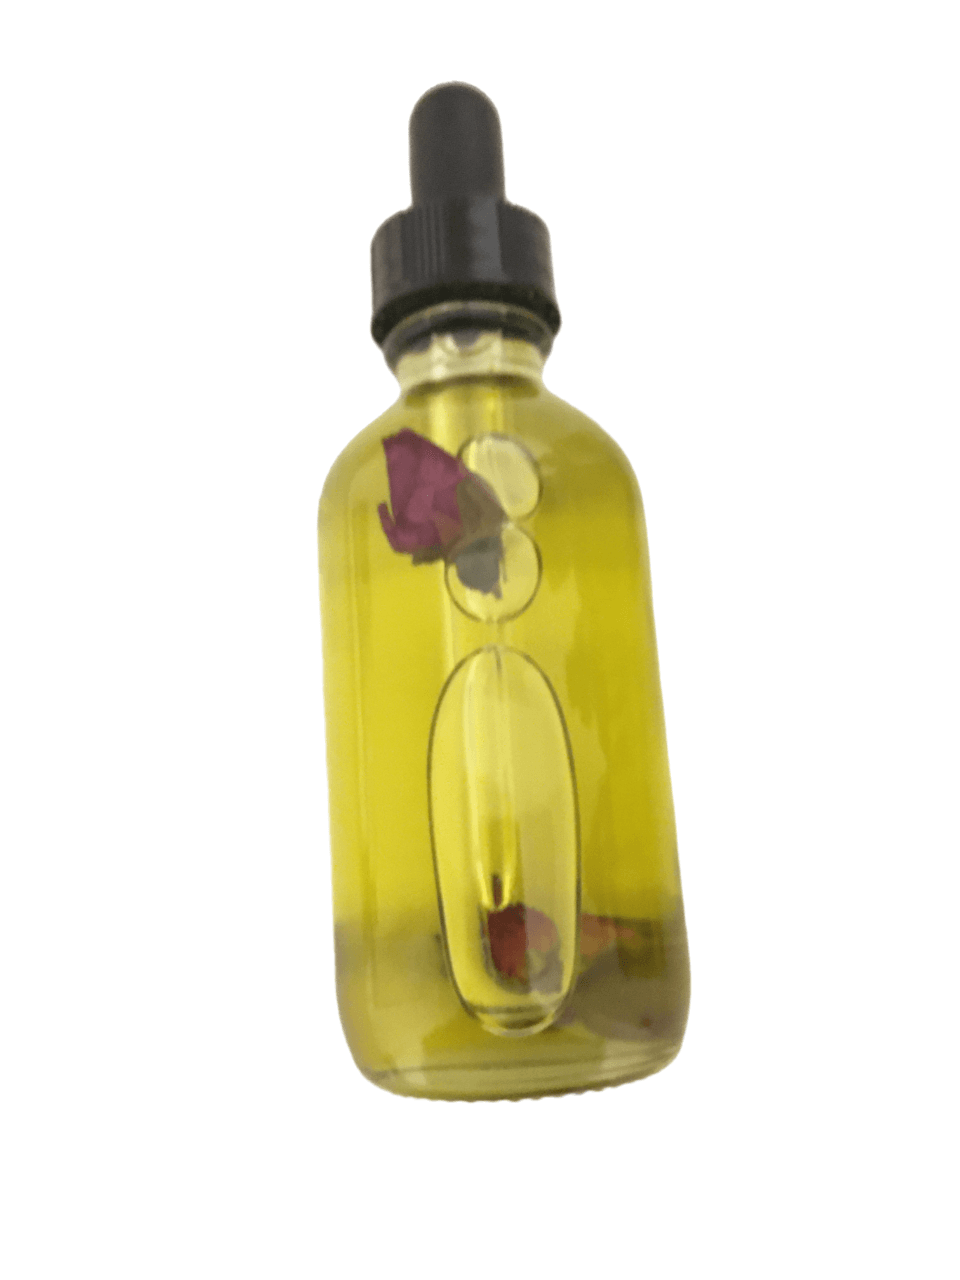 Wholesale Infused Rose Body Oil Private Label - Elite Creed Natural